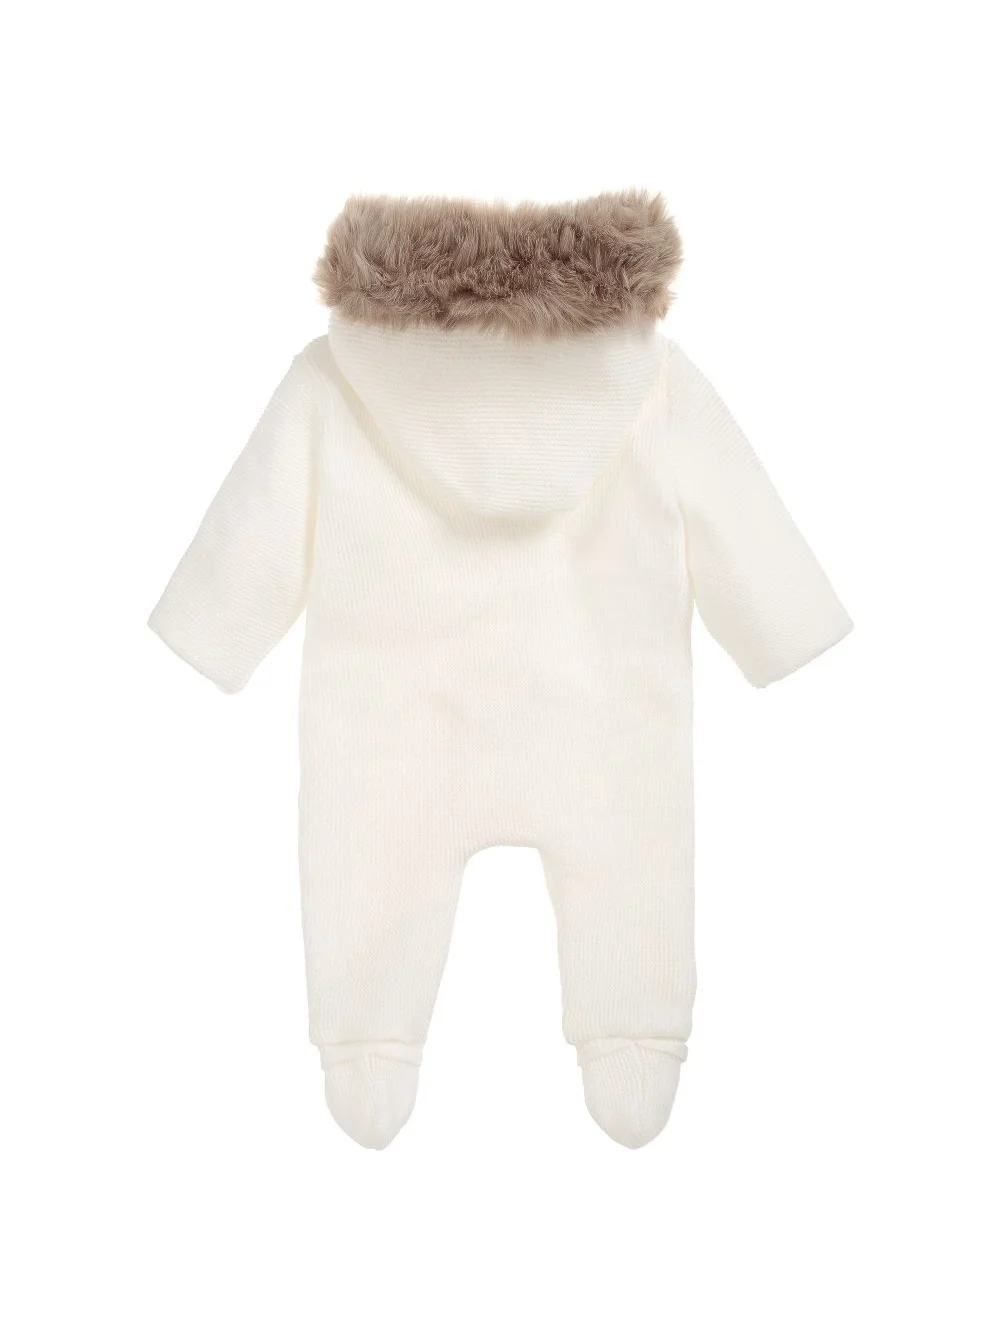 Winter kids jumpsuits knitted baby sweater romper for baby girls and baby boys with detached shearing hood